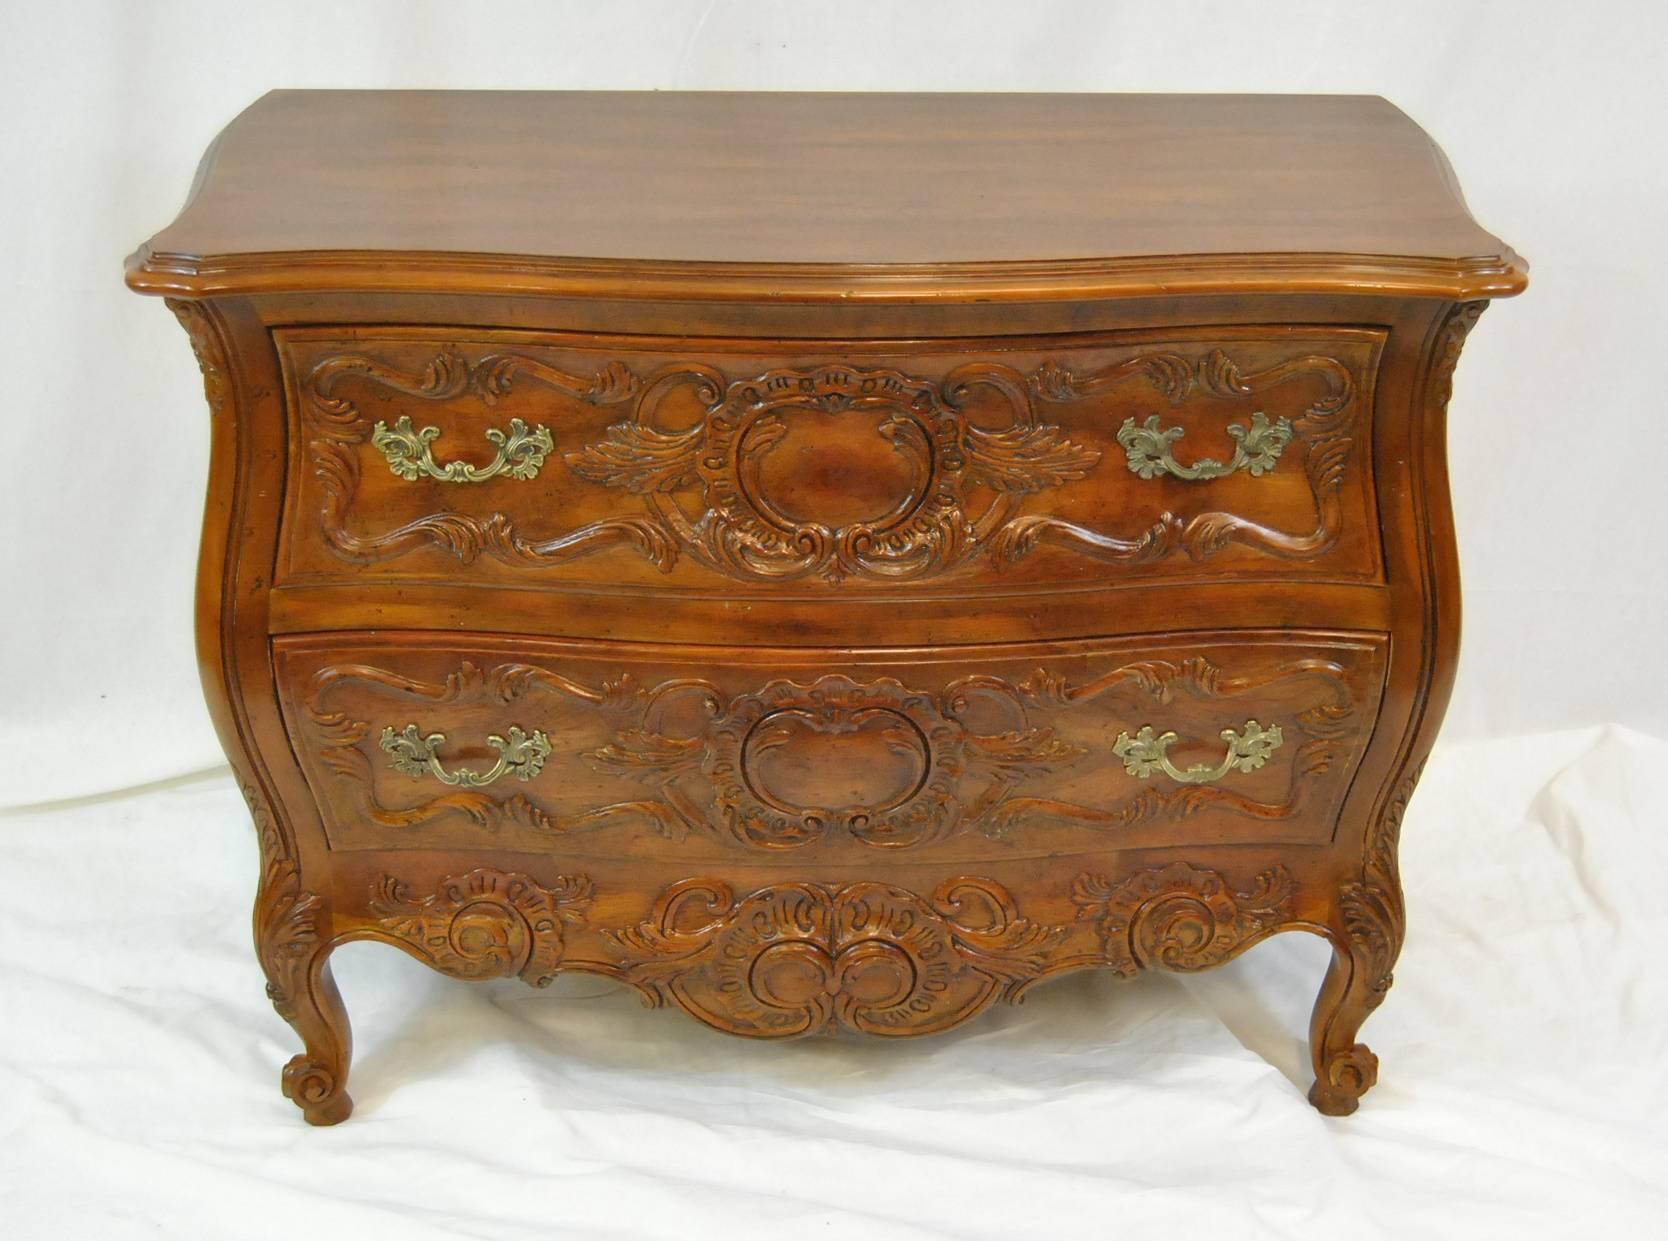 Louis XV French Walnut Two-Drawer Bombe Style Commode Chest by John Widdicomb